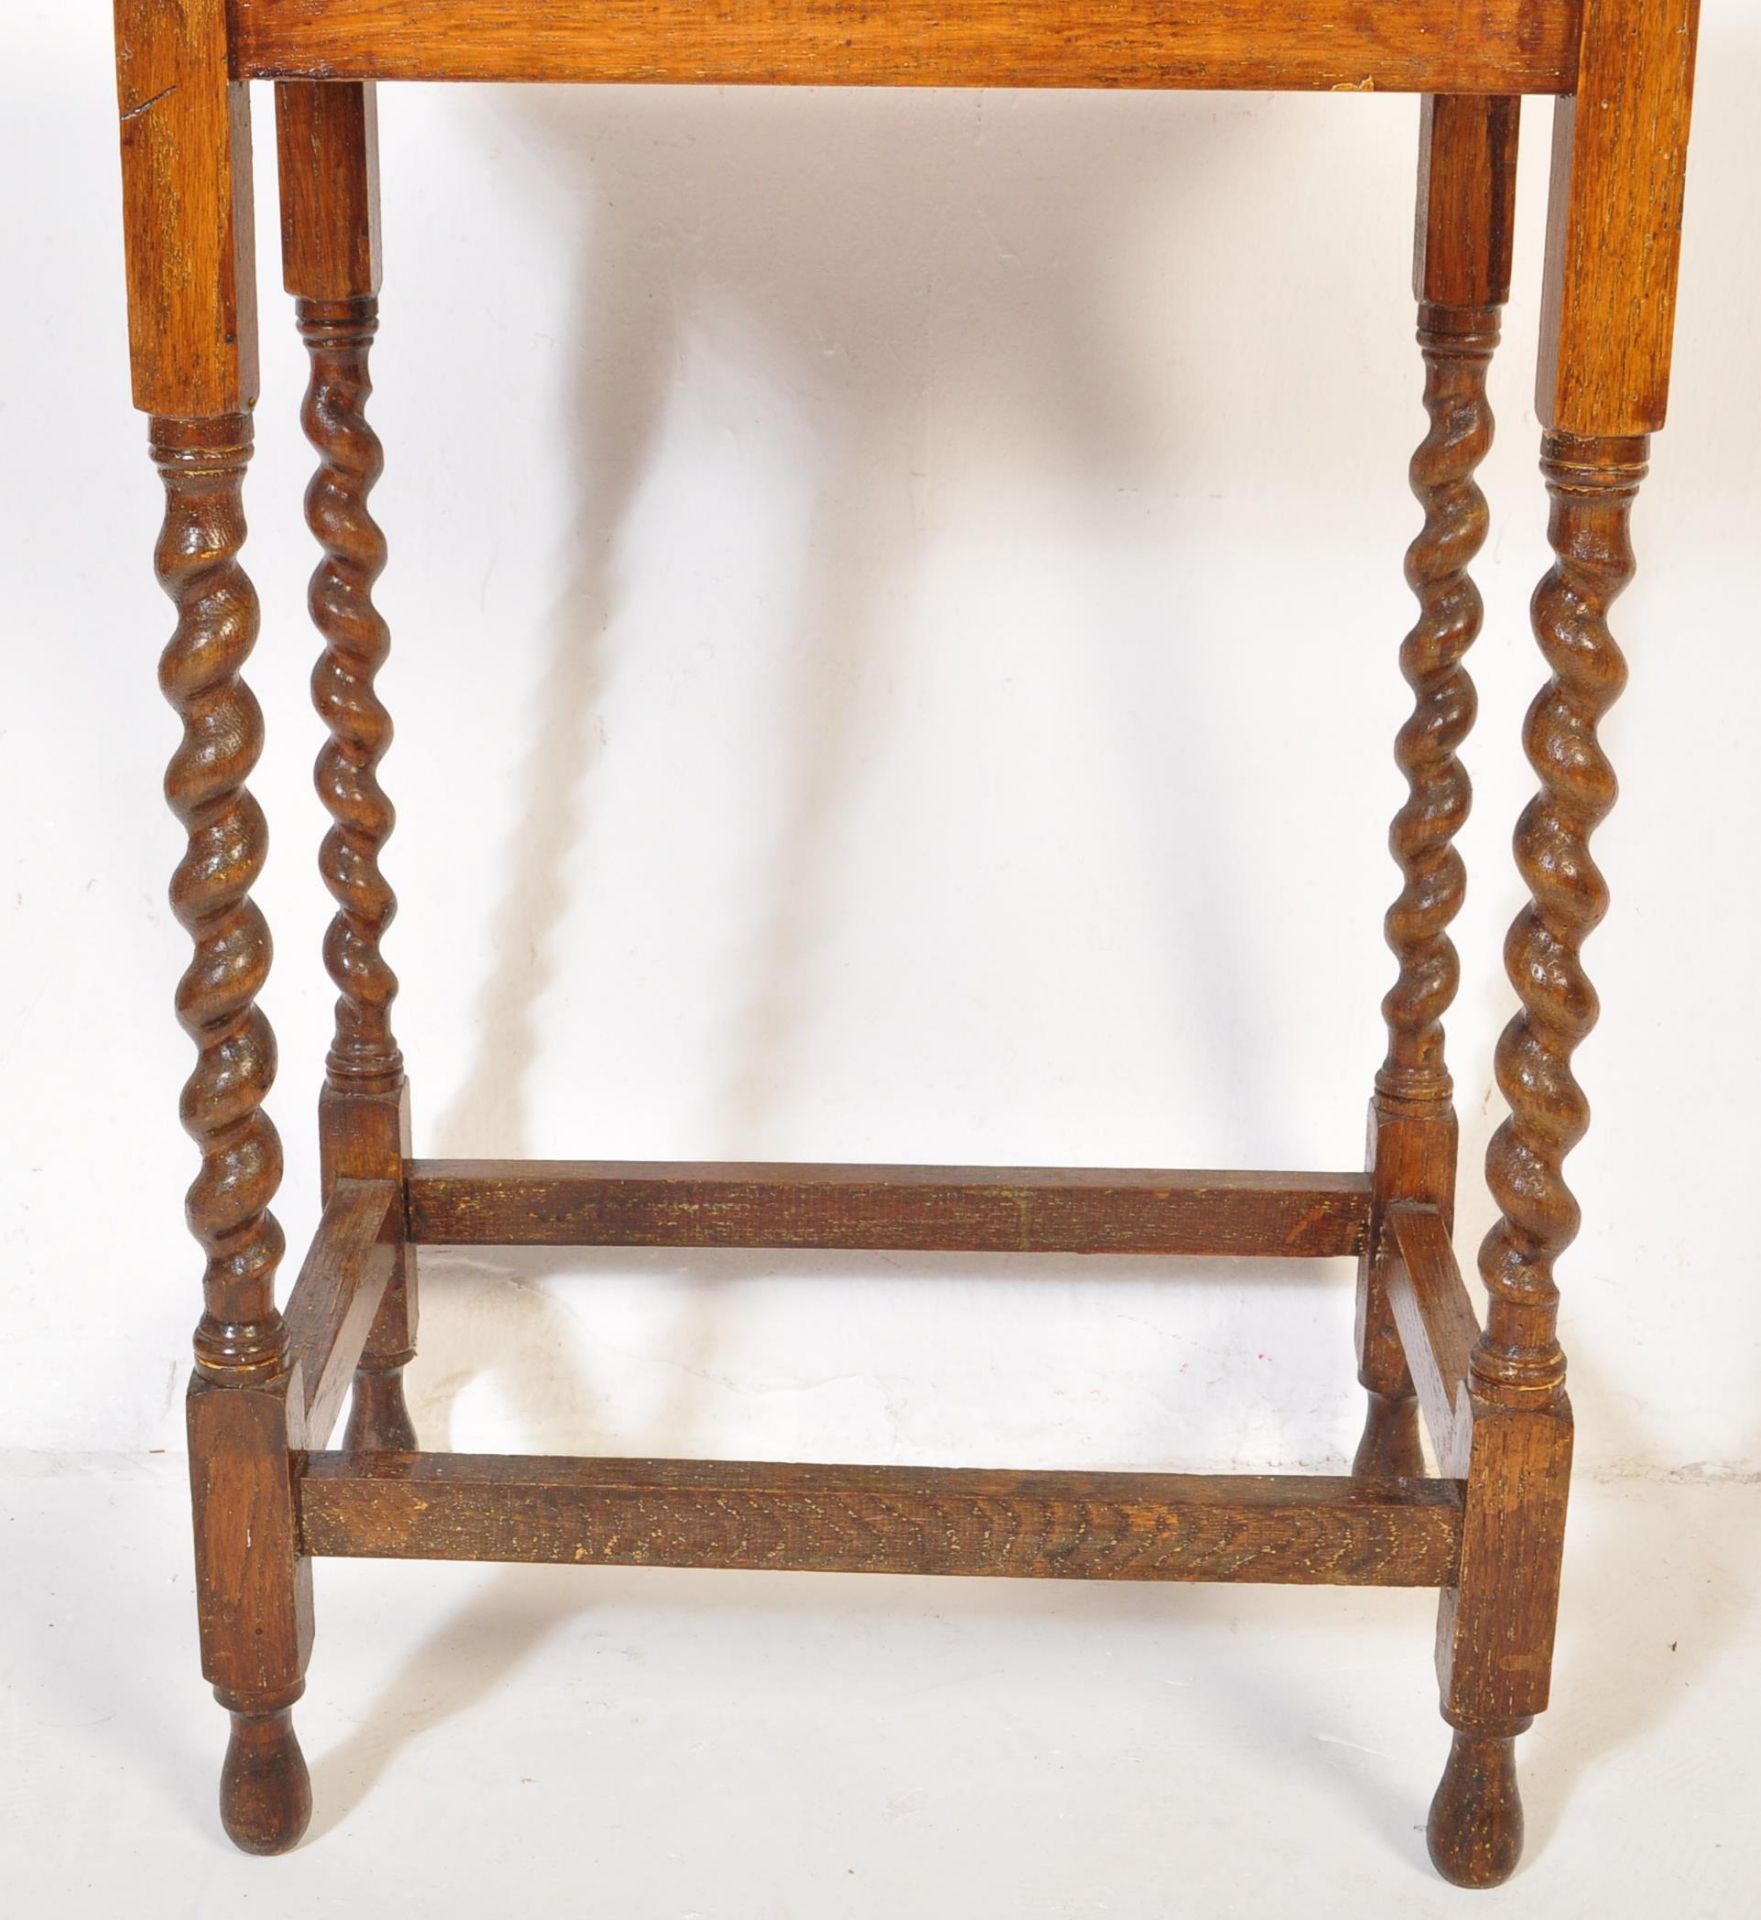 EARLY 20TH CENTURY BARELY TWIST OAK OCCASIONAL SIDE HALL TABLE - Image 4 of 5